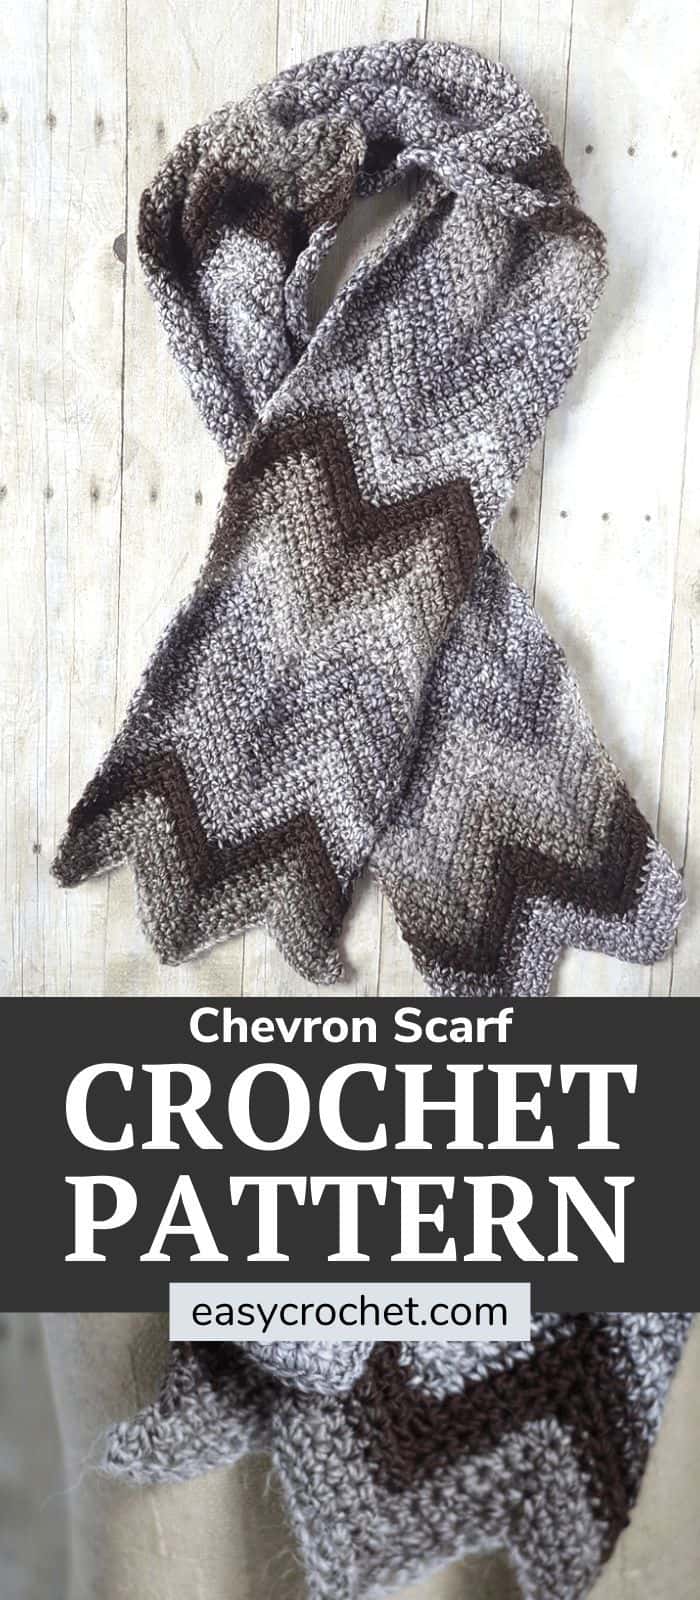 Free Chevron Scarf Crochet Pattern that is simple and fast to work up! via @easycrochetcom